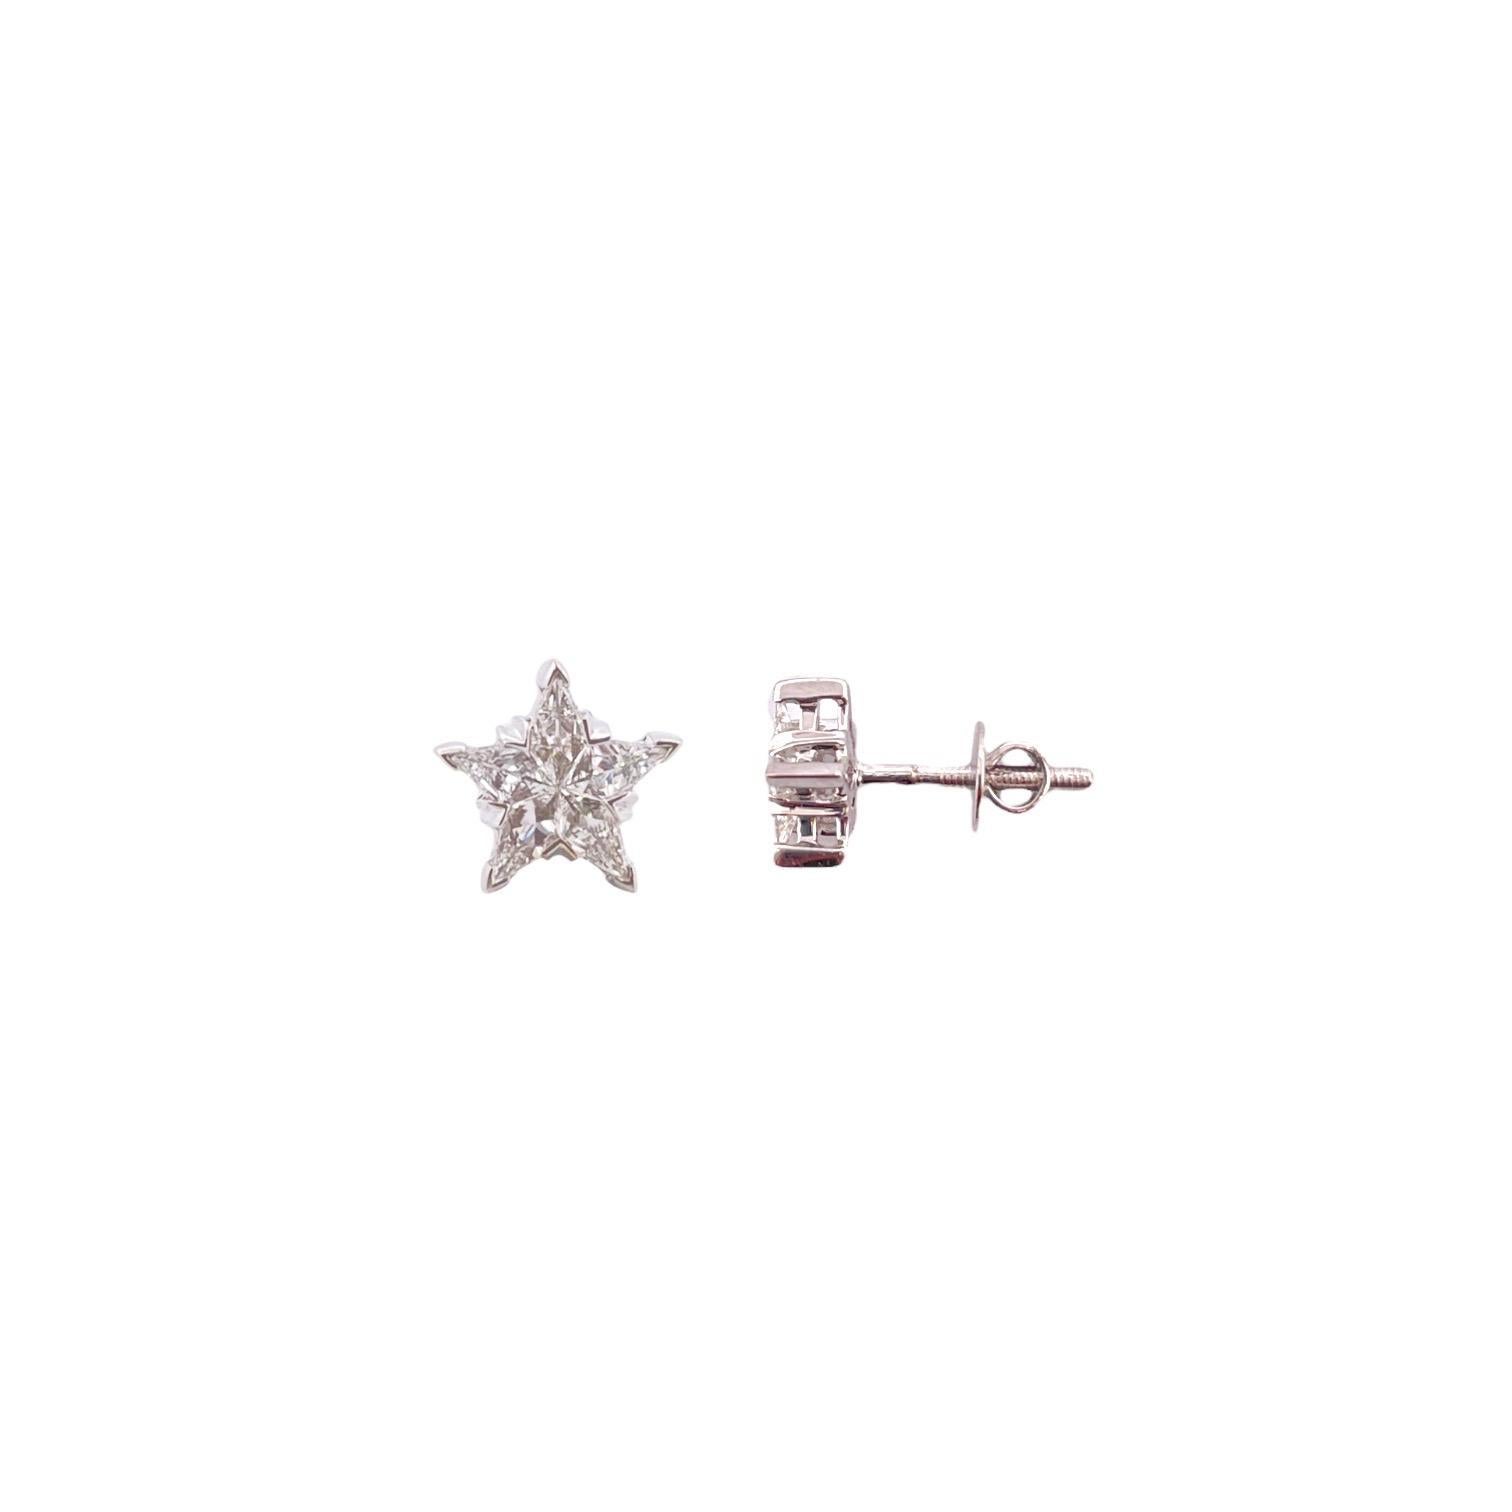 Elevate your elegance with our Princess Diamond Stud Earrings, a timeless pair of perfection. These exquisite stud earrings feature two brilliant diamonds with a total carat weight (TCW) of 0.43, elegantly set in 14K white gold. With a combined